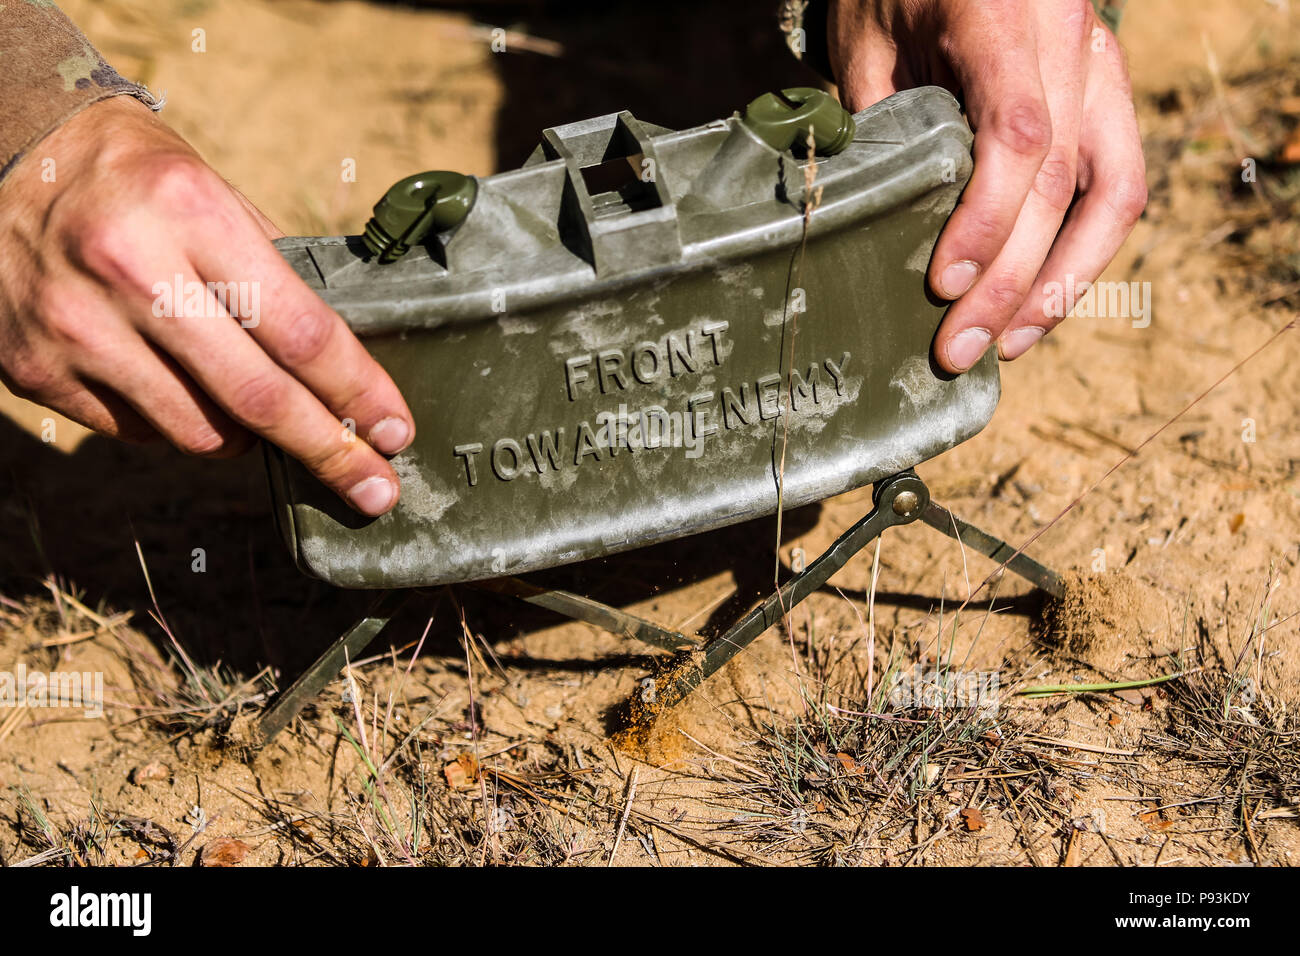 Claymore Mine High Resolution Stock Photography and Images - Alamy